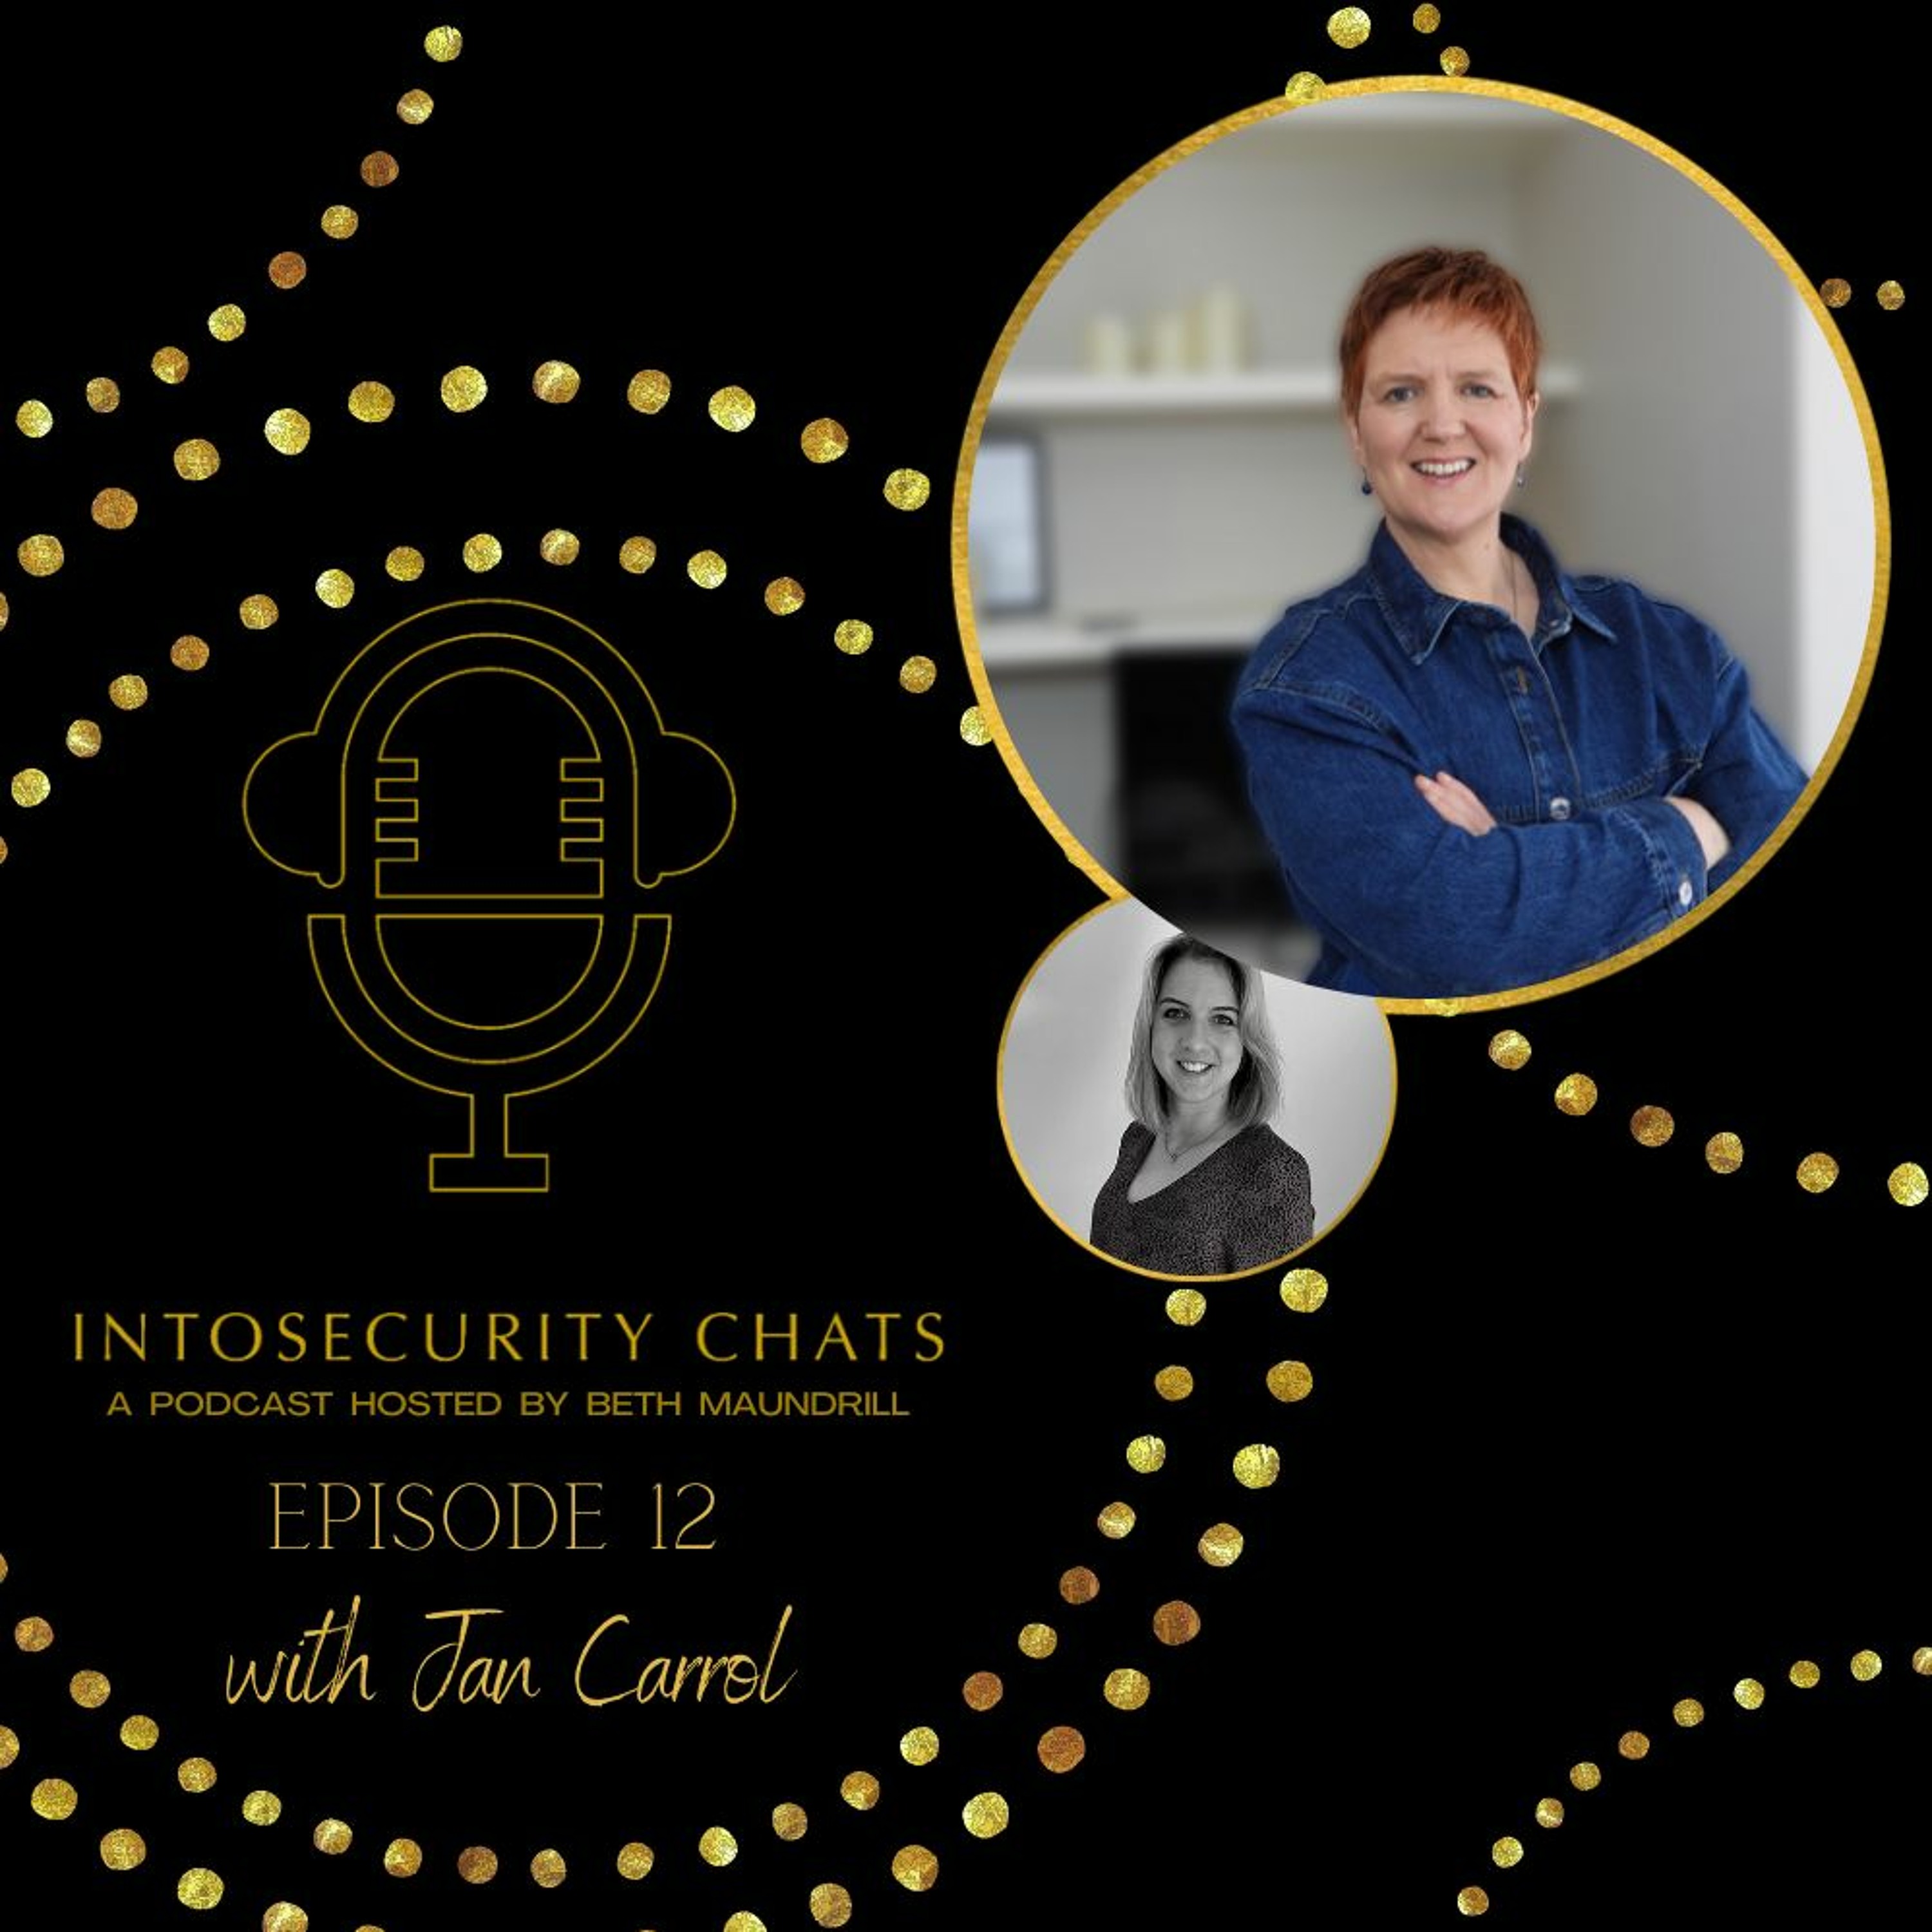 IntoSecurity Chats, Episode 12 - Jan Carrol, Brought to you By Tufin